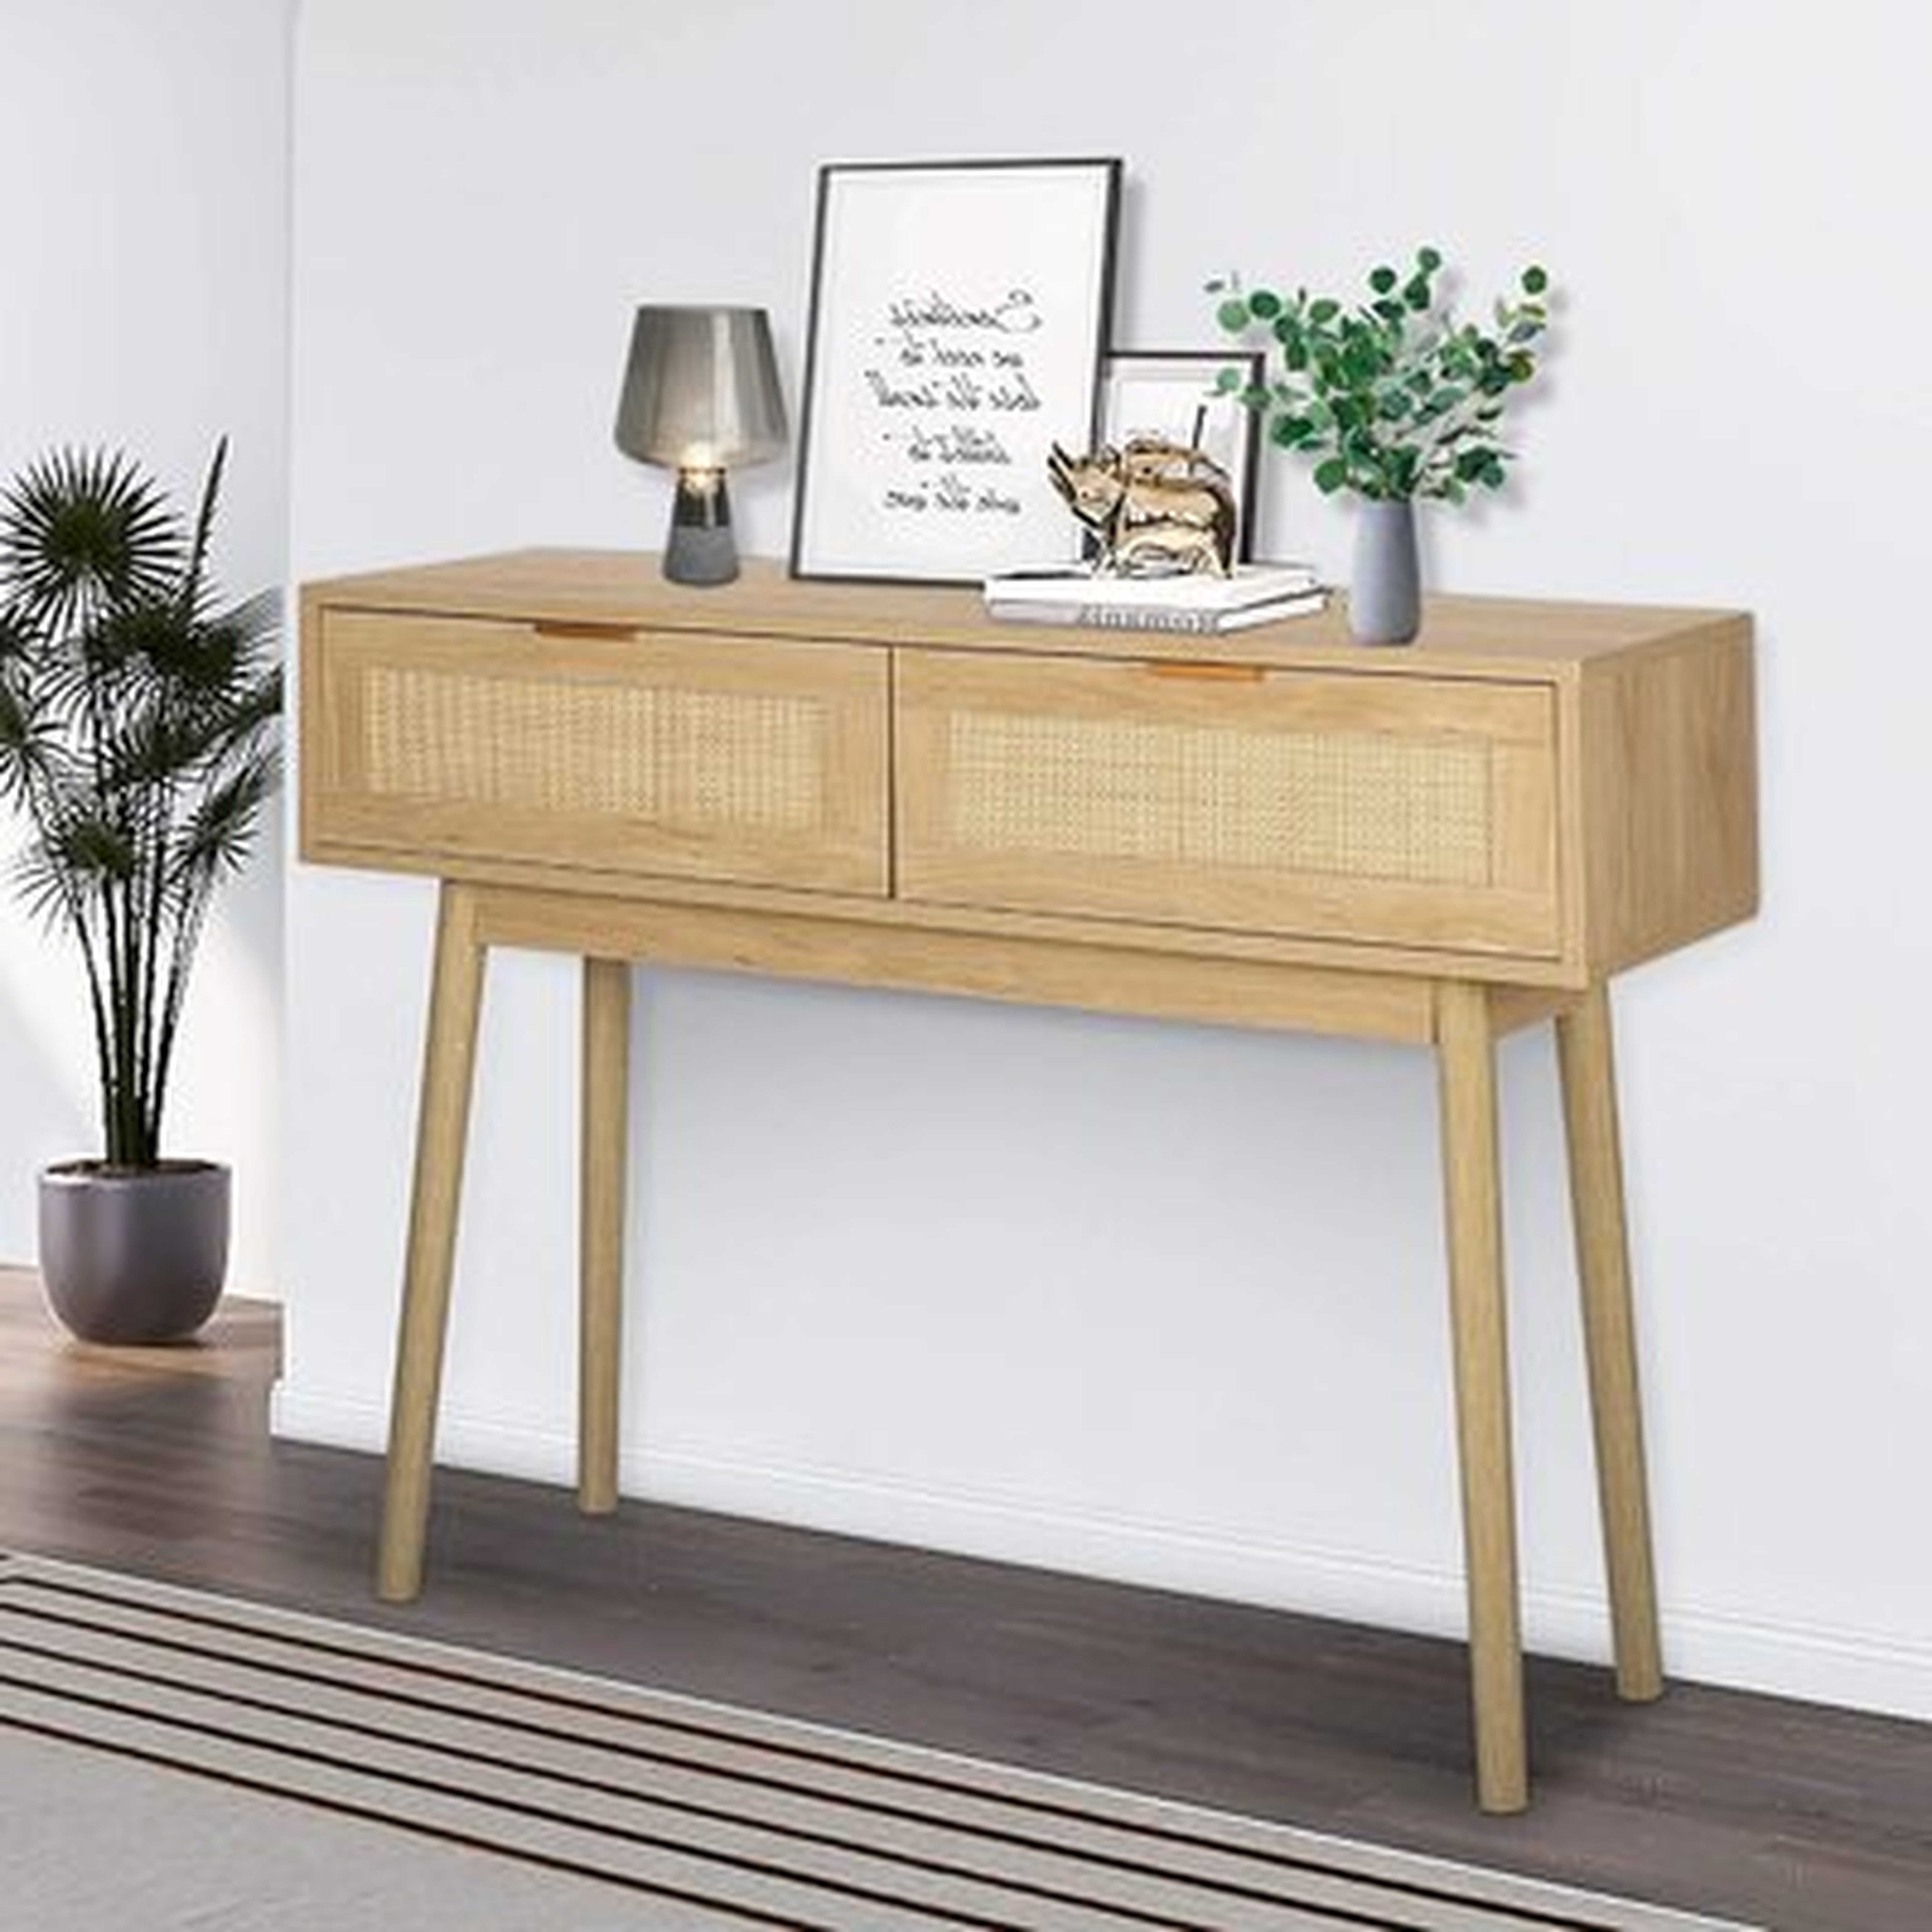 39" Console Table, Oak Grain Sofa Table With Wood Frame, Rustic Hallway Table With 2 Bamboo Weaving Storage Drawers For Foyer Living Room Entryway - Wayfair